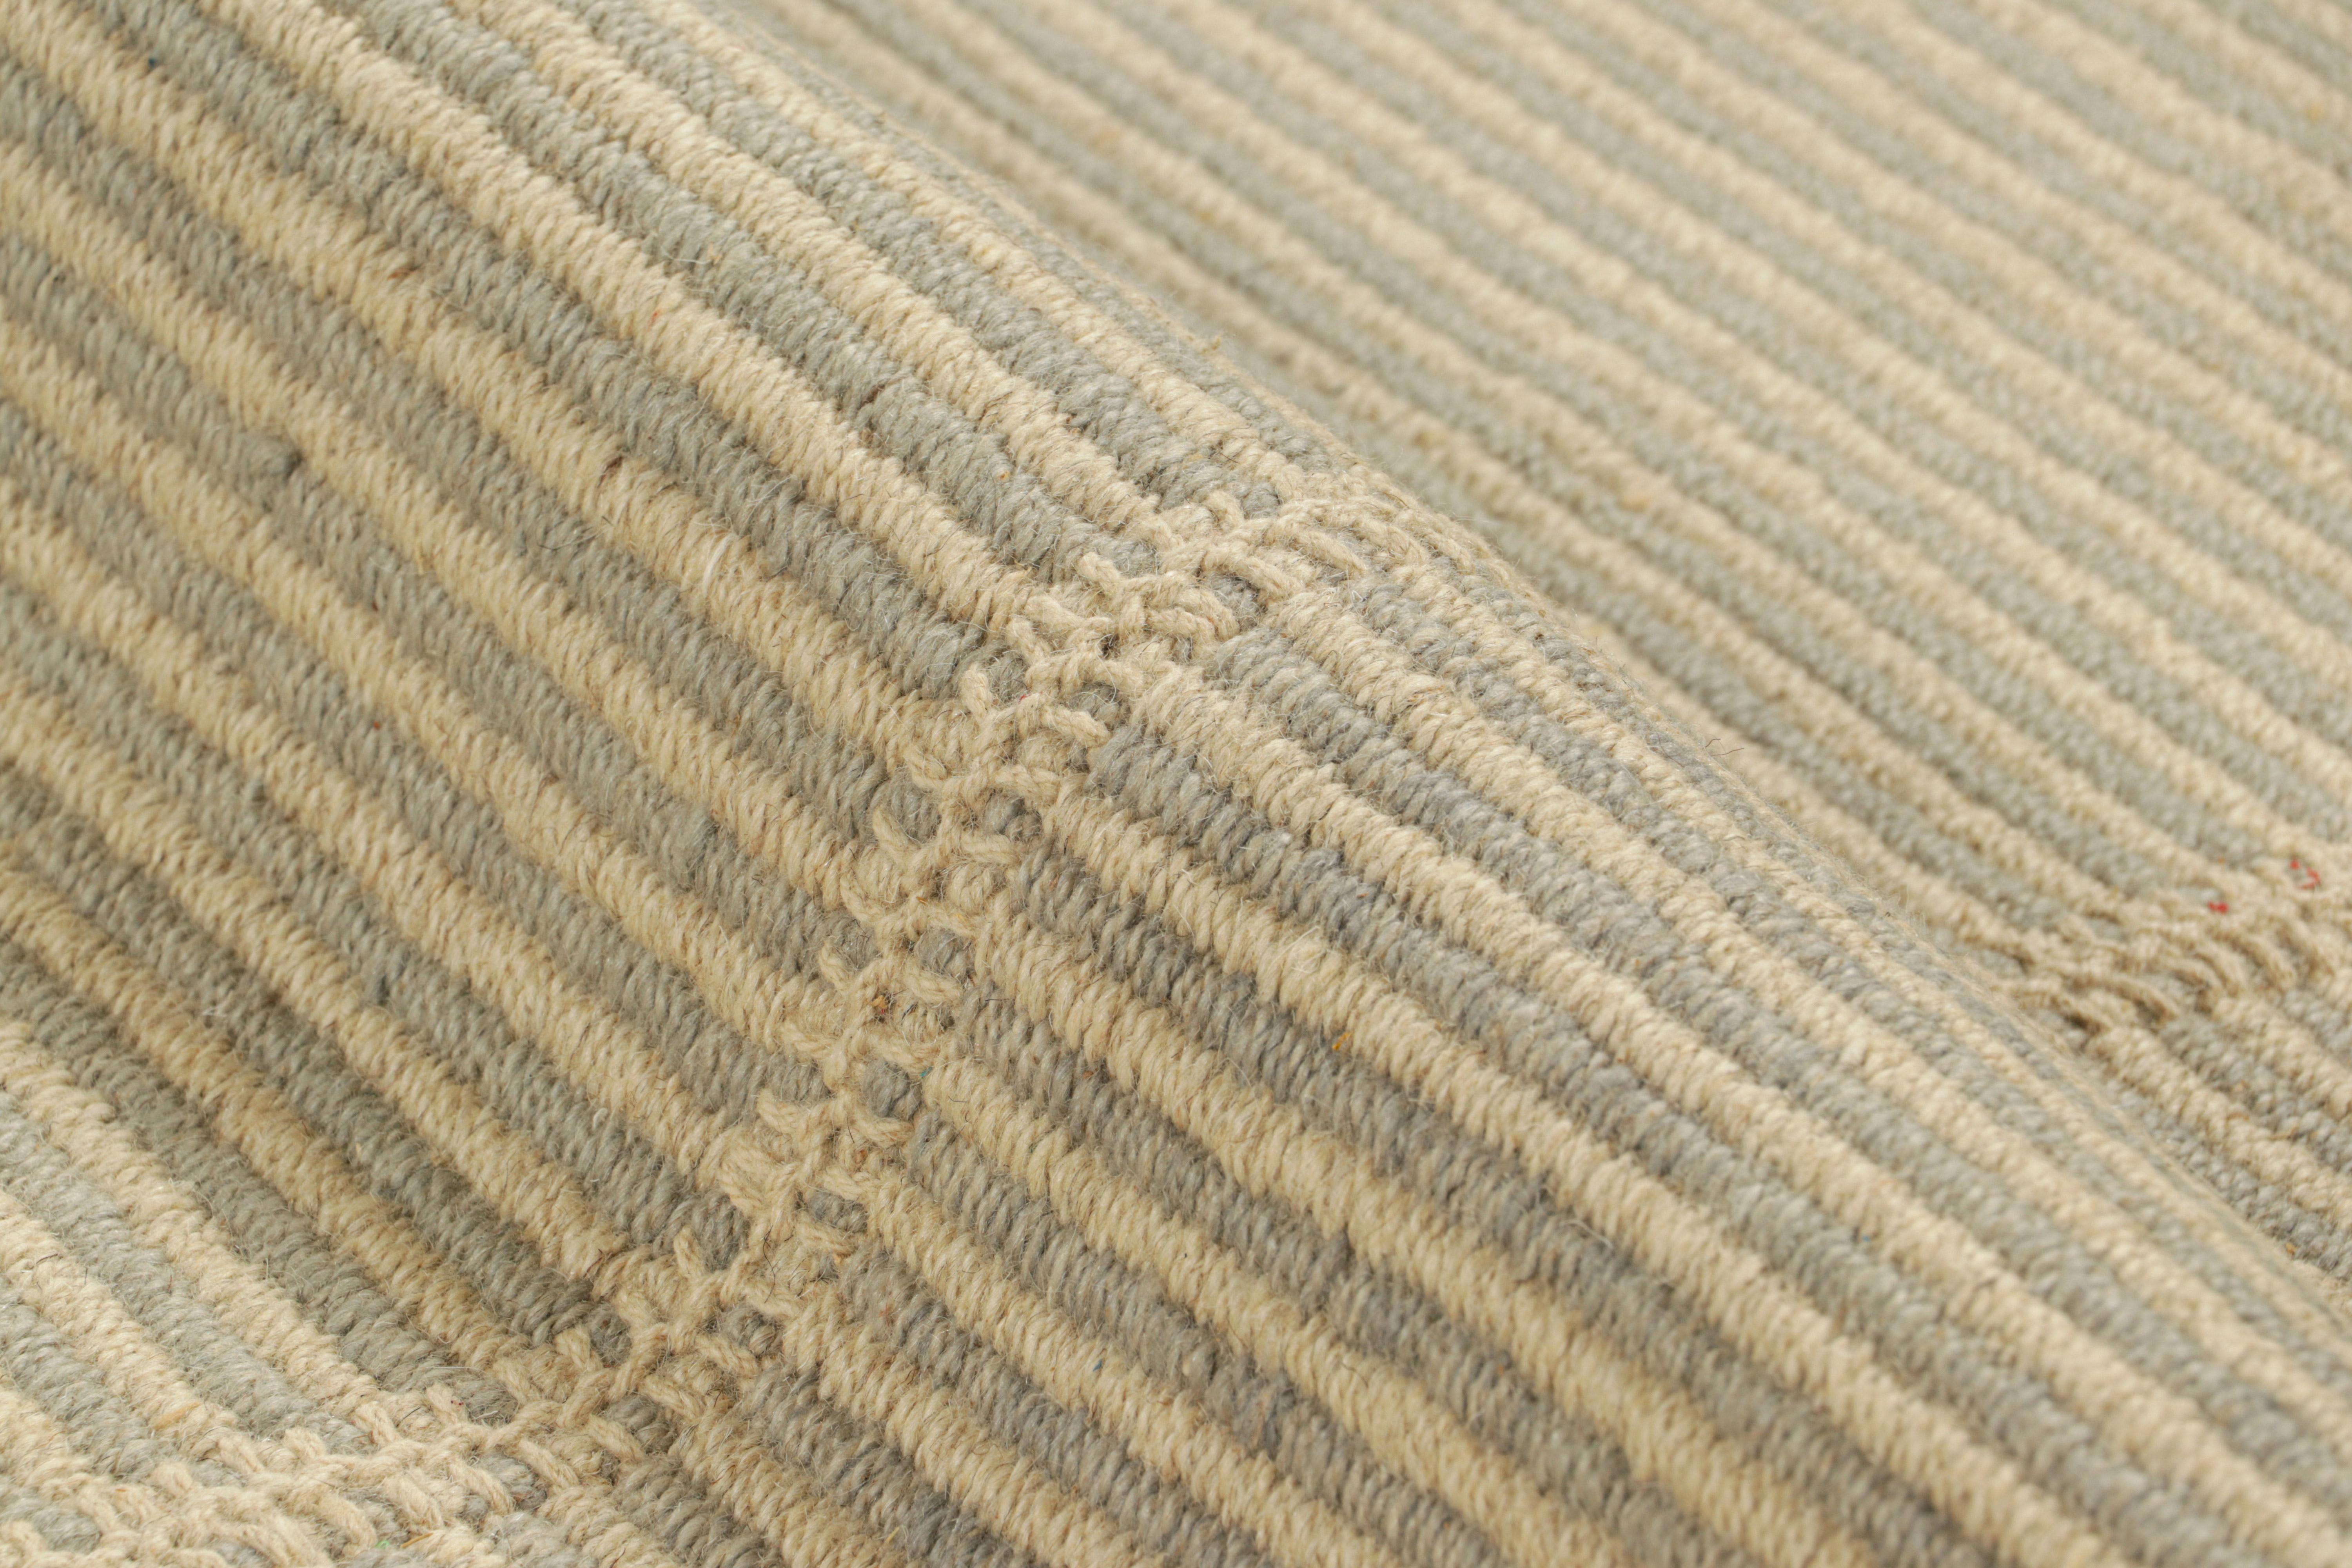 Rug & Kilim’s Contemporary Kilim in Beige-Brown Textural Stripes In New Condition For Sale In Long Island City, NY